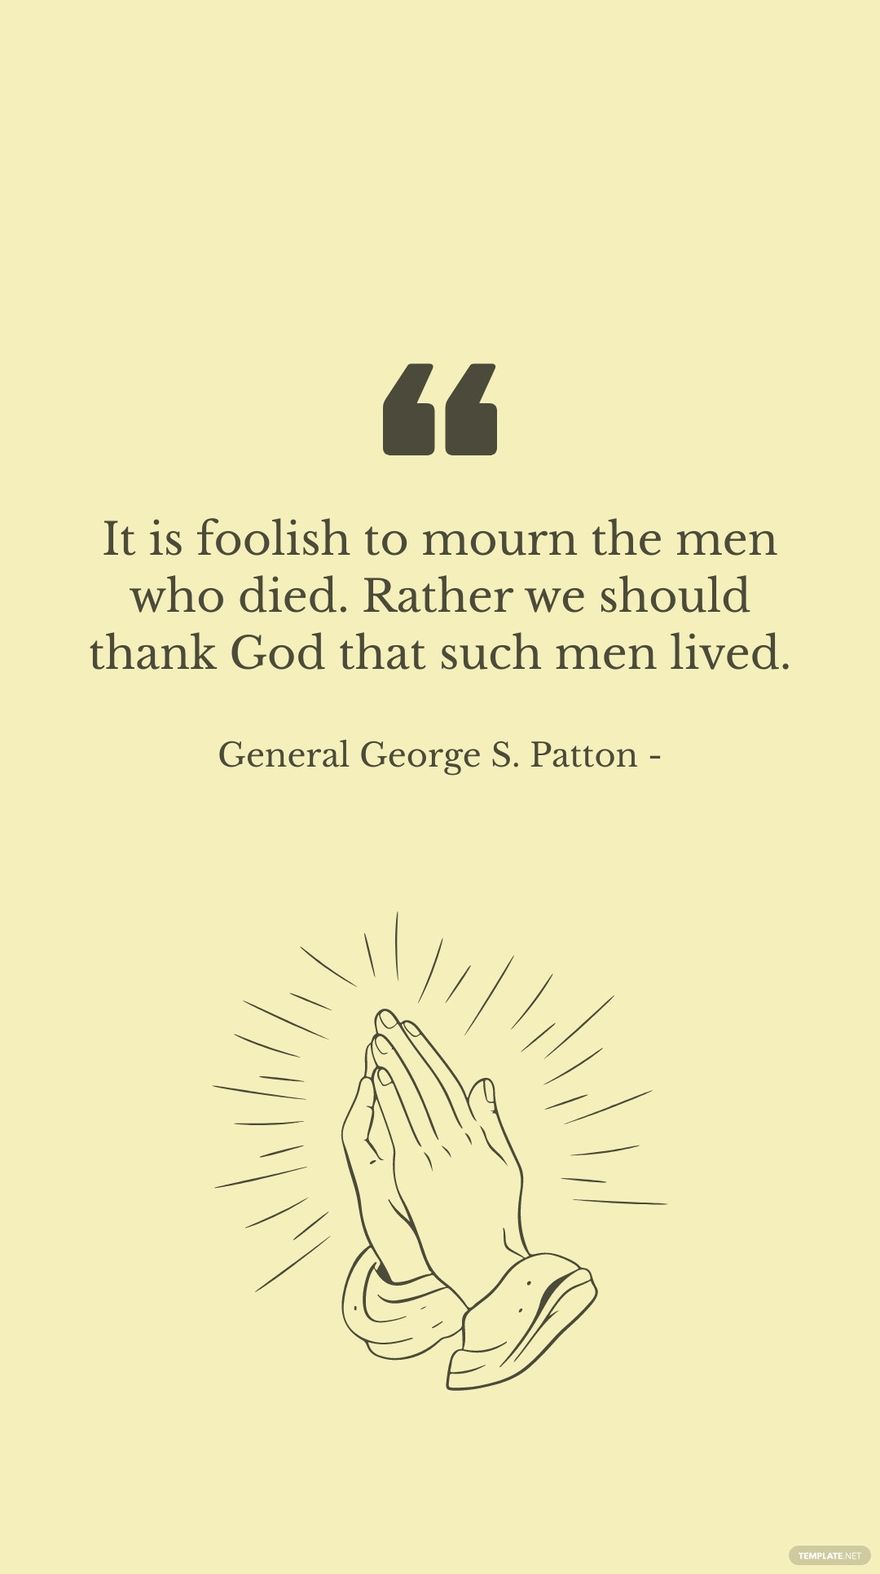 Free General George S. Patton - It is foolish to mourn the men who died. Rather we should thank God that such men lived. in JPG